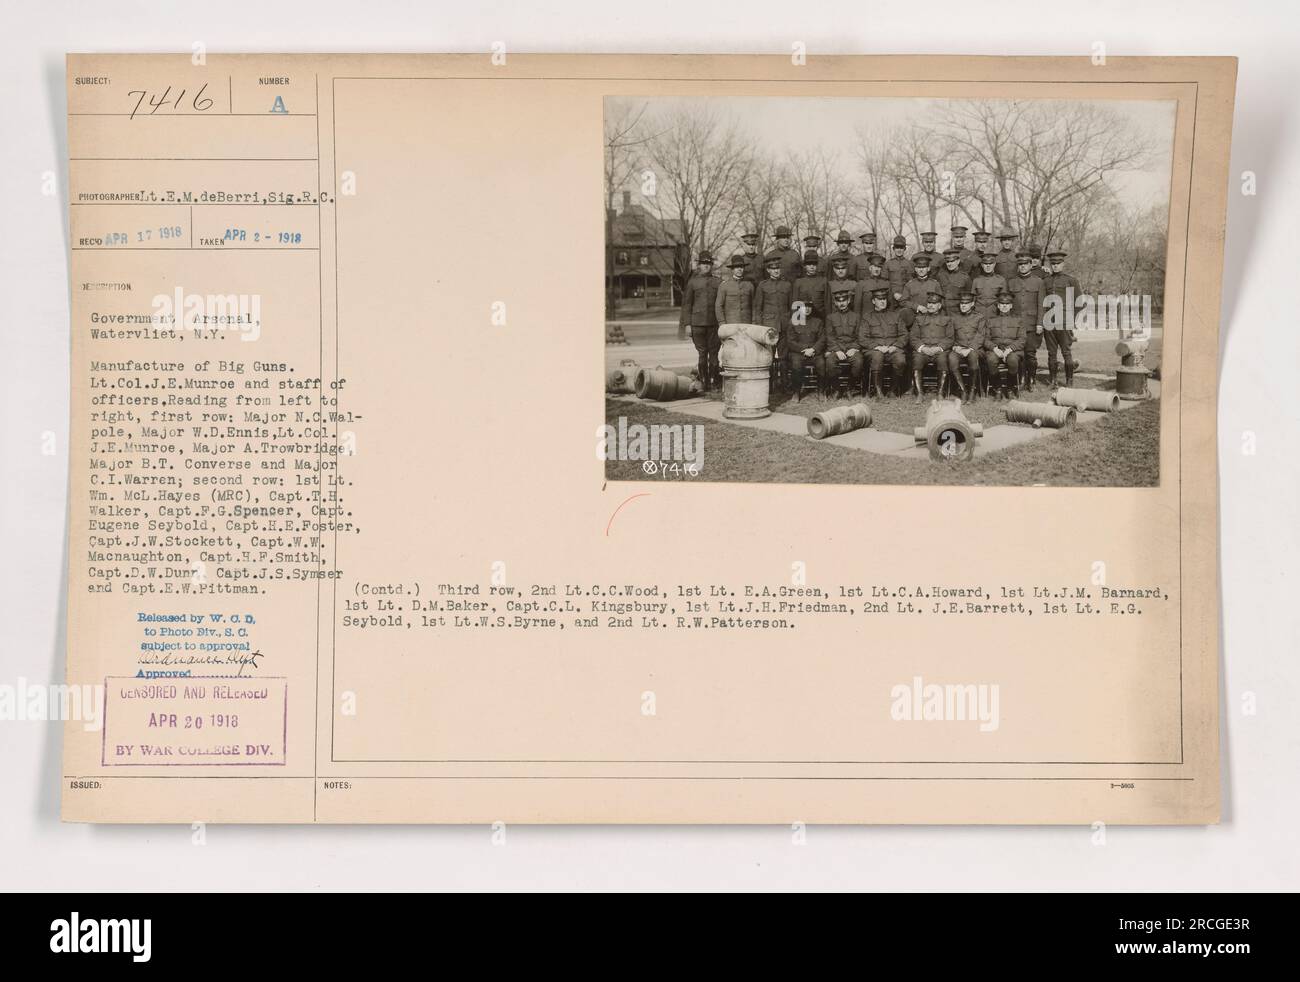 Lt. Col. J.E. Munroe and his staff of officers from the Government Arsenal in Watervliet, NY are pictured in this photograph. The photograph provides a detailed listing of the officers from left to right in each row. The image is dated April 17, 1918. Stock Photo